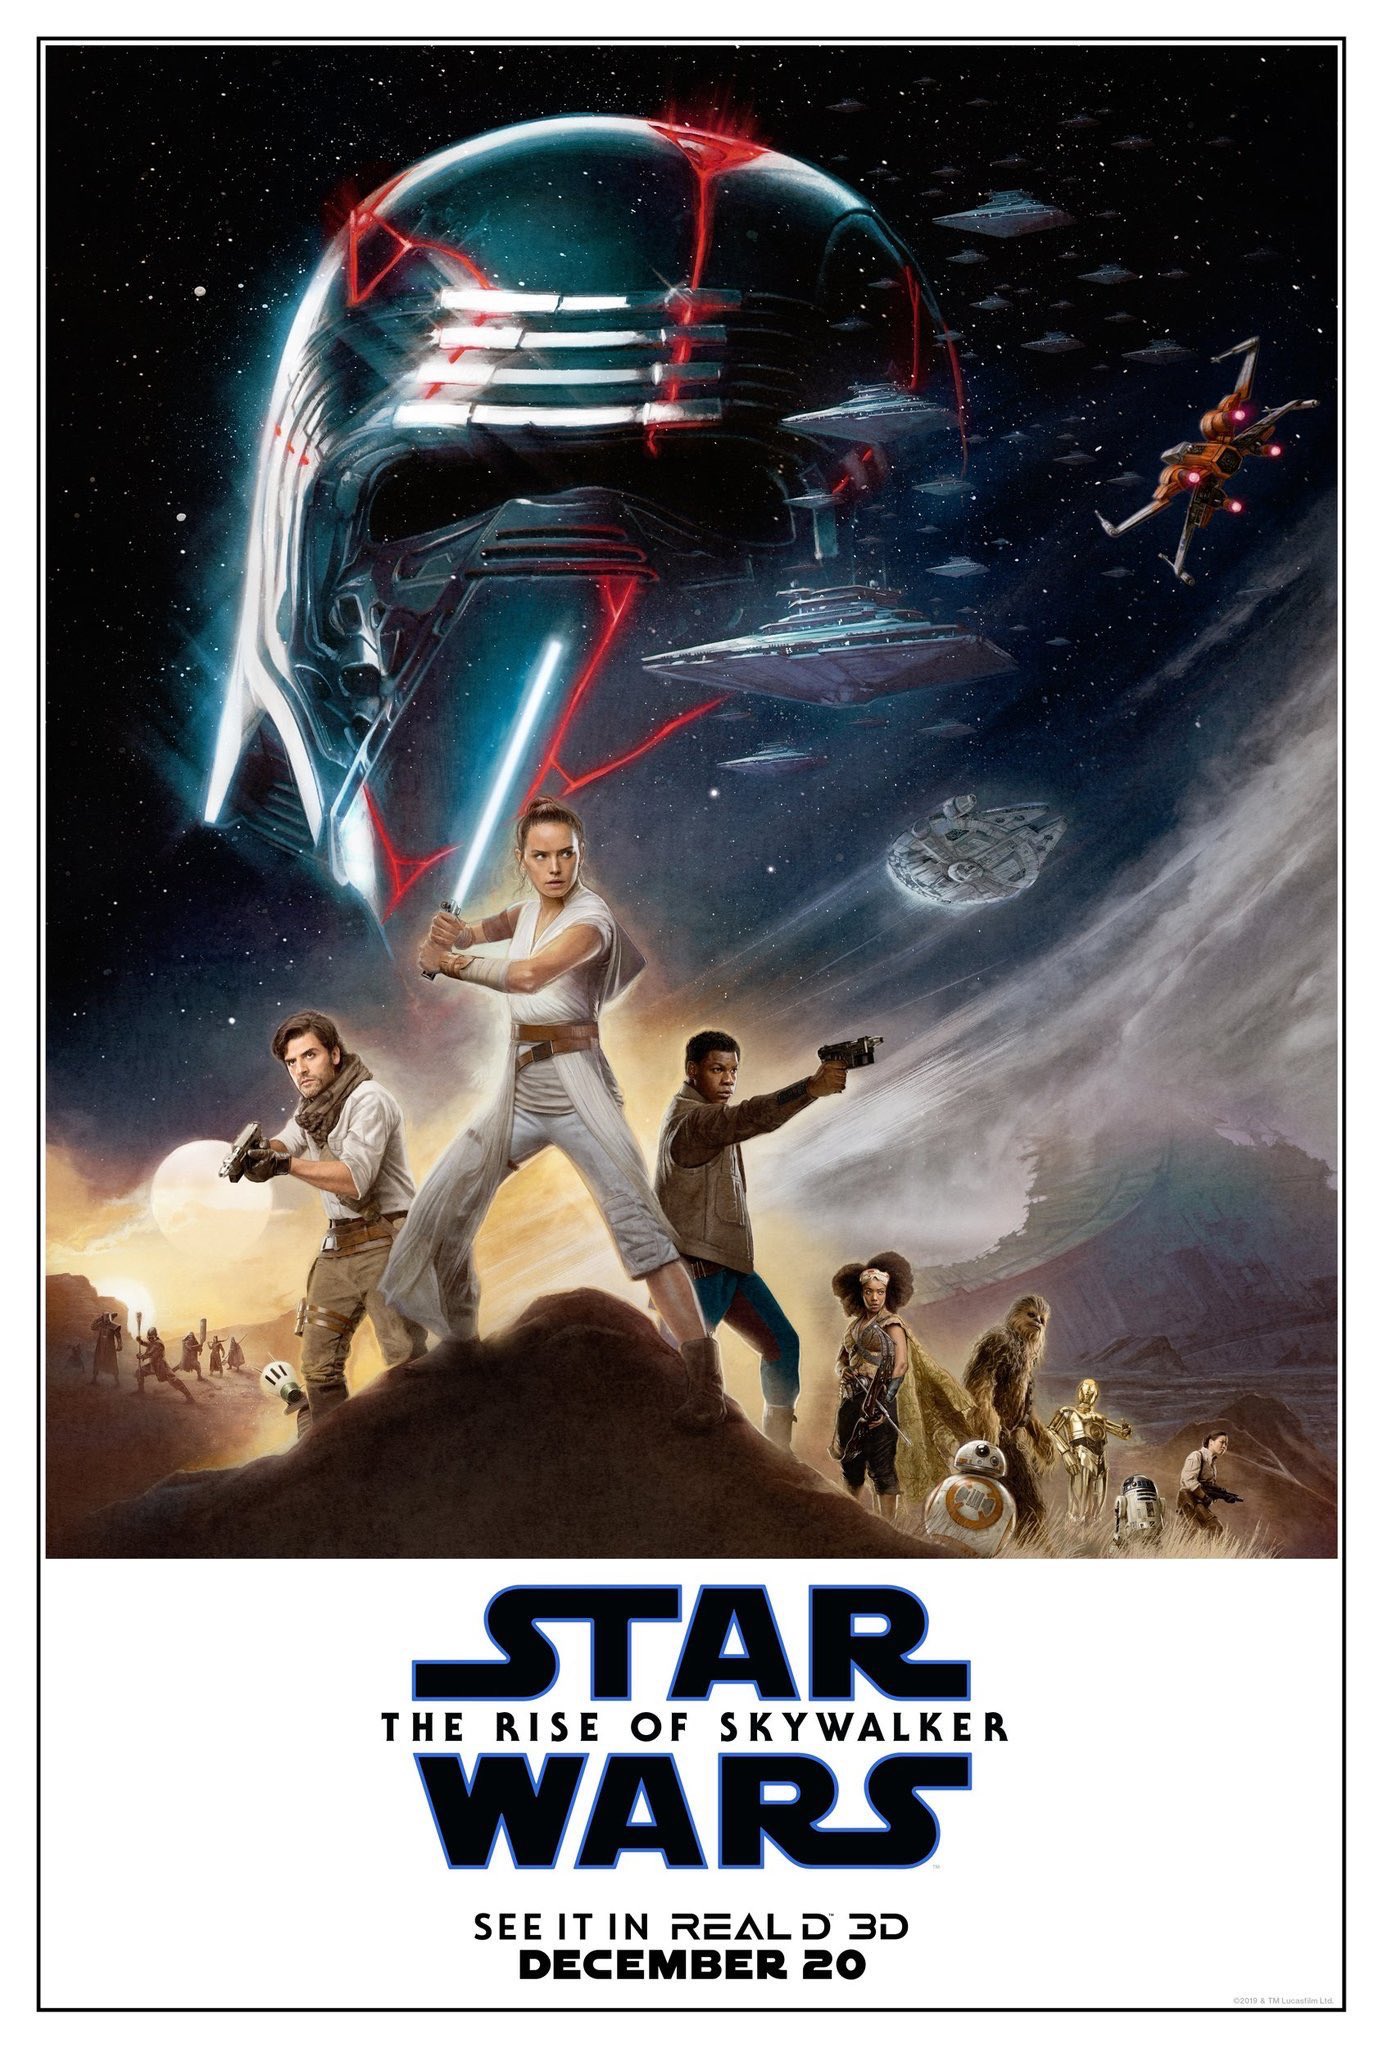 The Rise of Skywalker IMAX Poster Harkens Back to the Original New Hope Poster